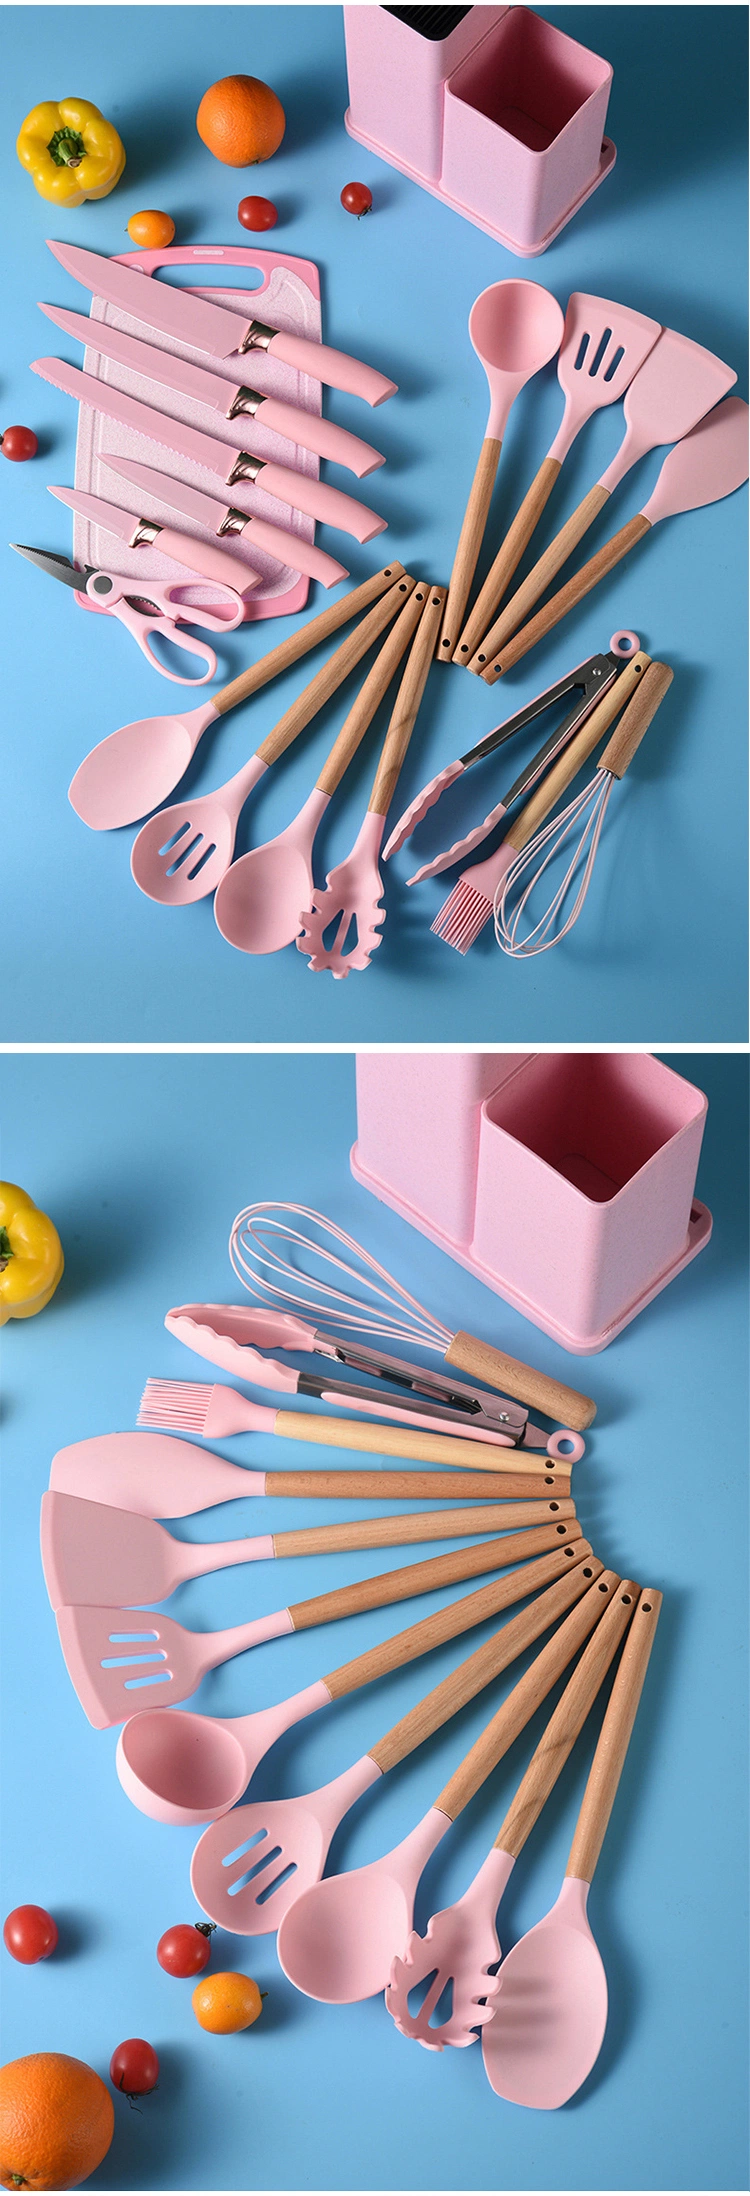 19-Piece Kitchen Gadget Tool Silicone Kitchen Utensil Set with Wooden Handle and Cuttings Board Storage Bucket